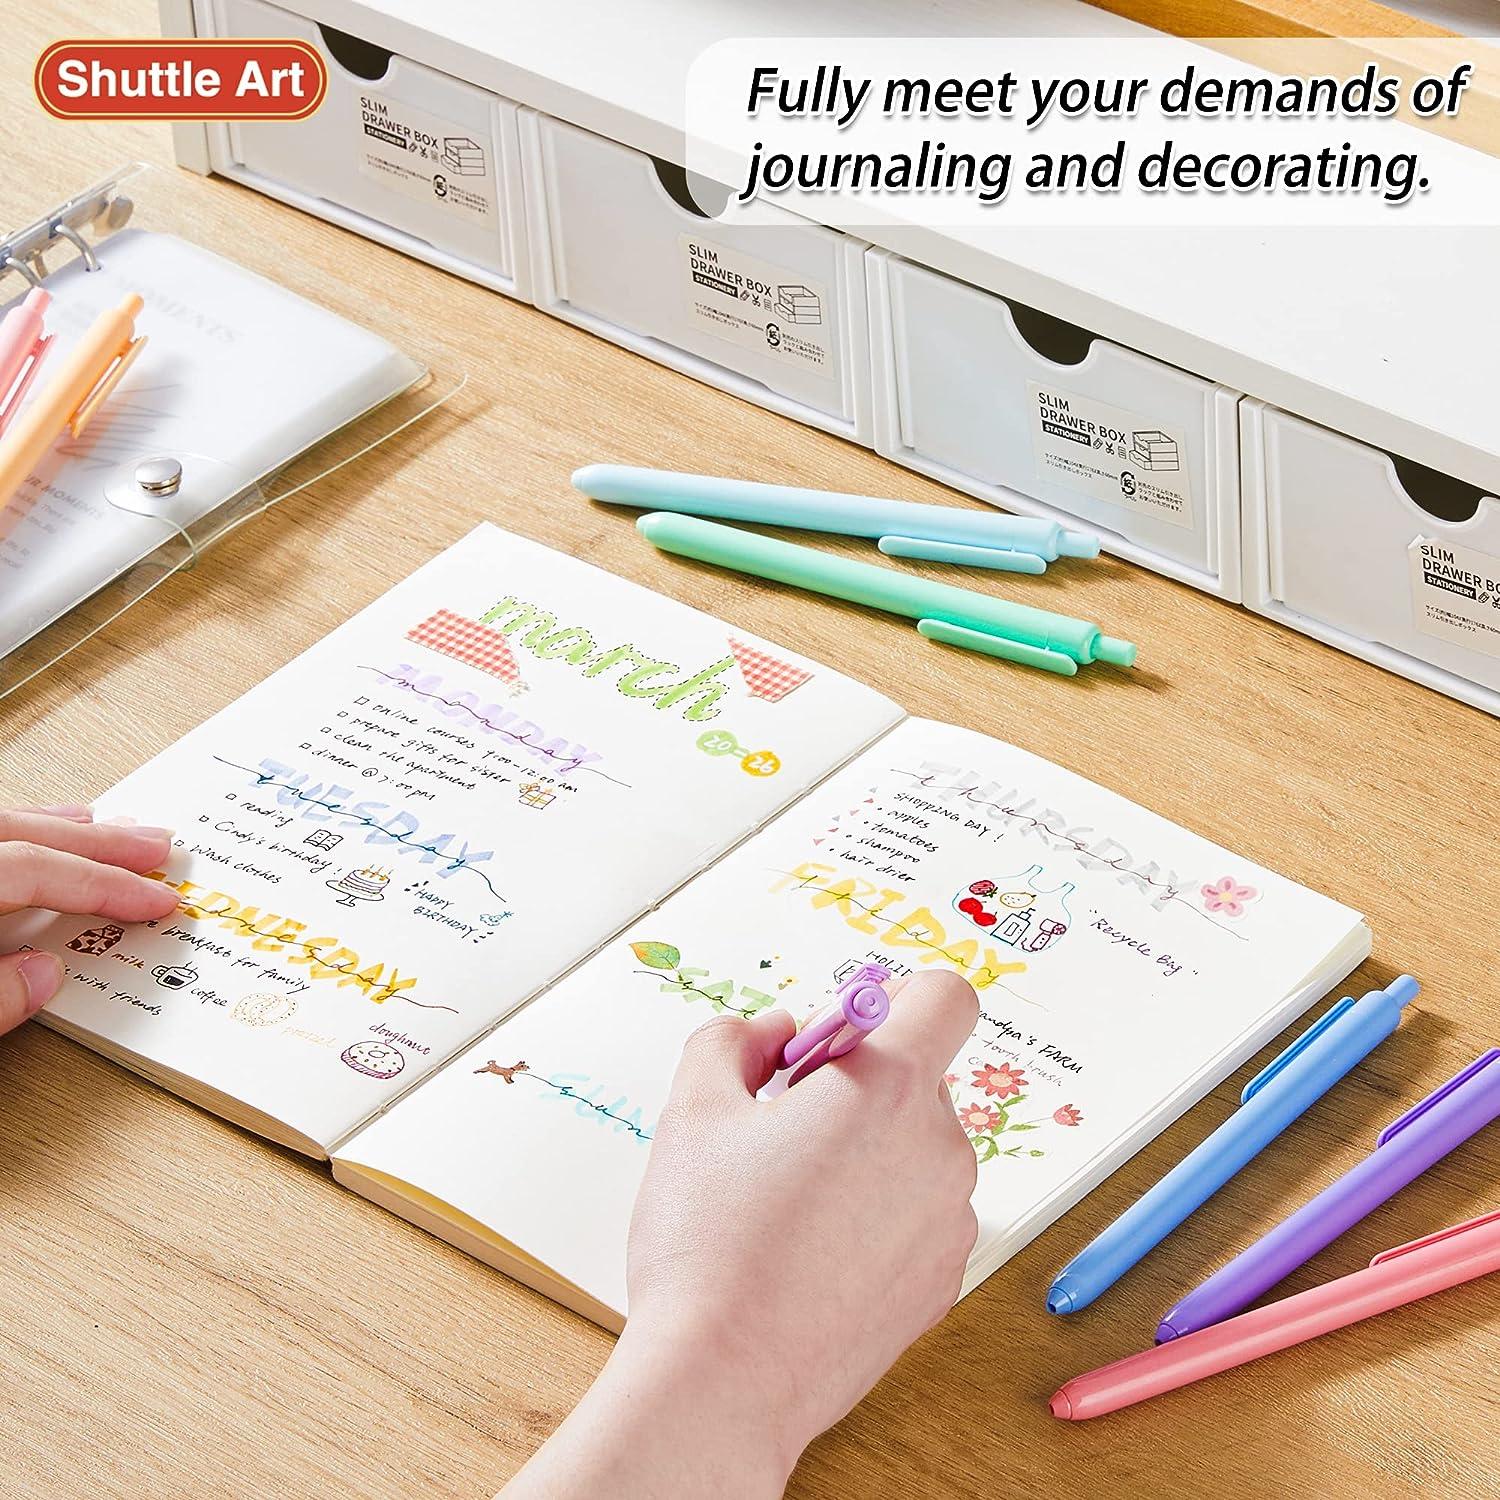 Shuttle Art Colored Gel Pens, 20 Colors Retractable Gel Ink Pens with Grip, Medium Point (0.7mm) Smooth Writing for Adults and Kids Writing Journaling